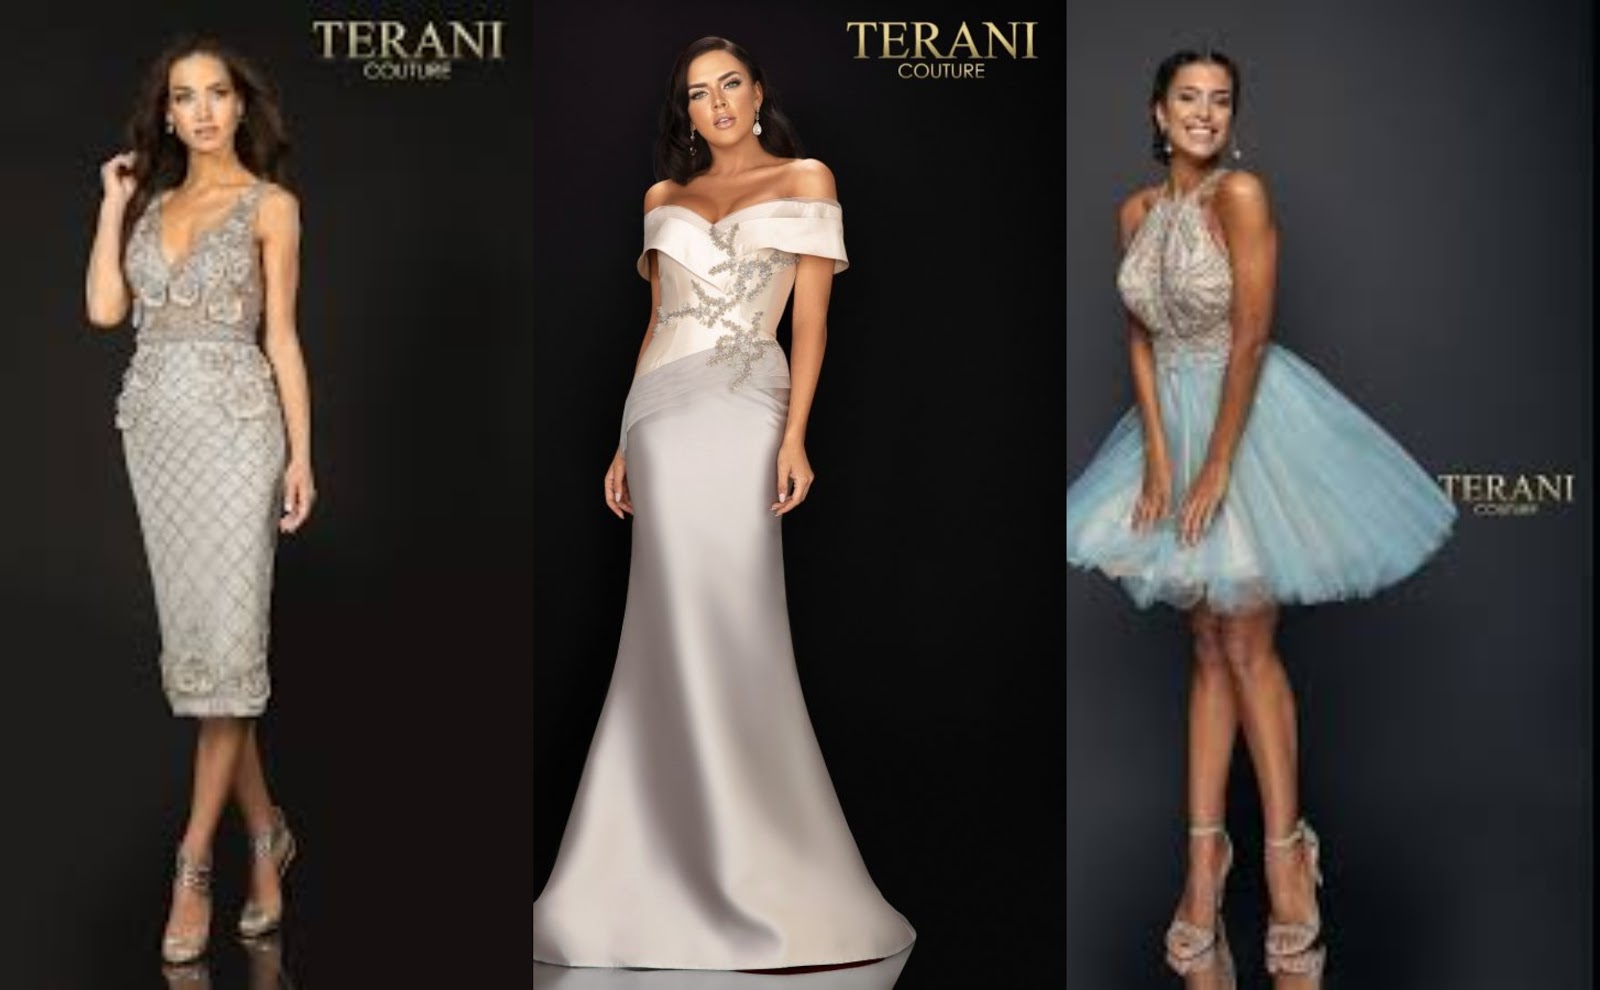 All About The Dresses That Top The List From Terani Couture Collection